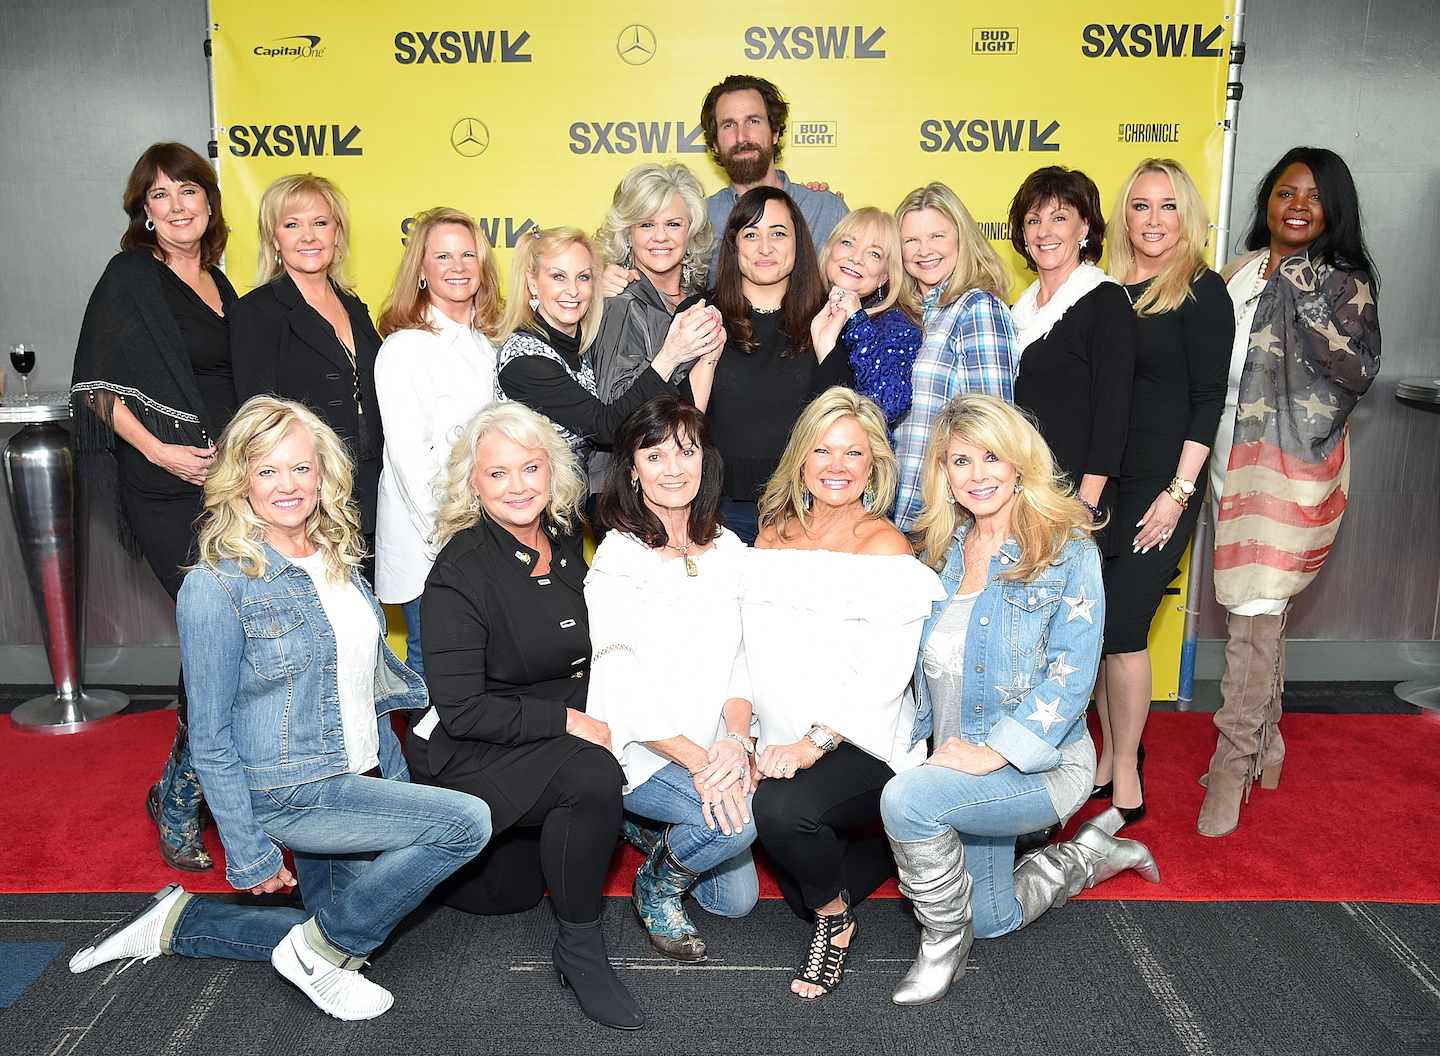 Director Dana Adam Shapiro and former Dallas Cowboys Cheerleaders attended the world premiere of Daughters of the Sexual Revolution: The Untold Story of the Dallas Cowboys Cheerleaders. Photo by Michael Loccisano/Getty Images for SXSW